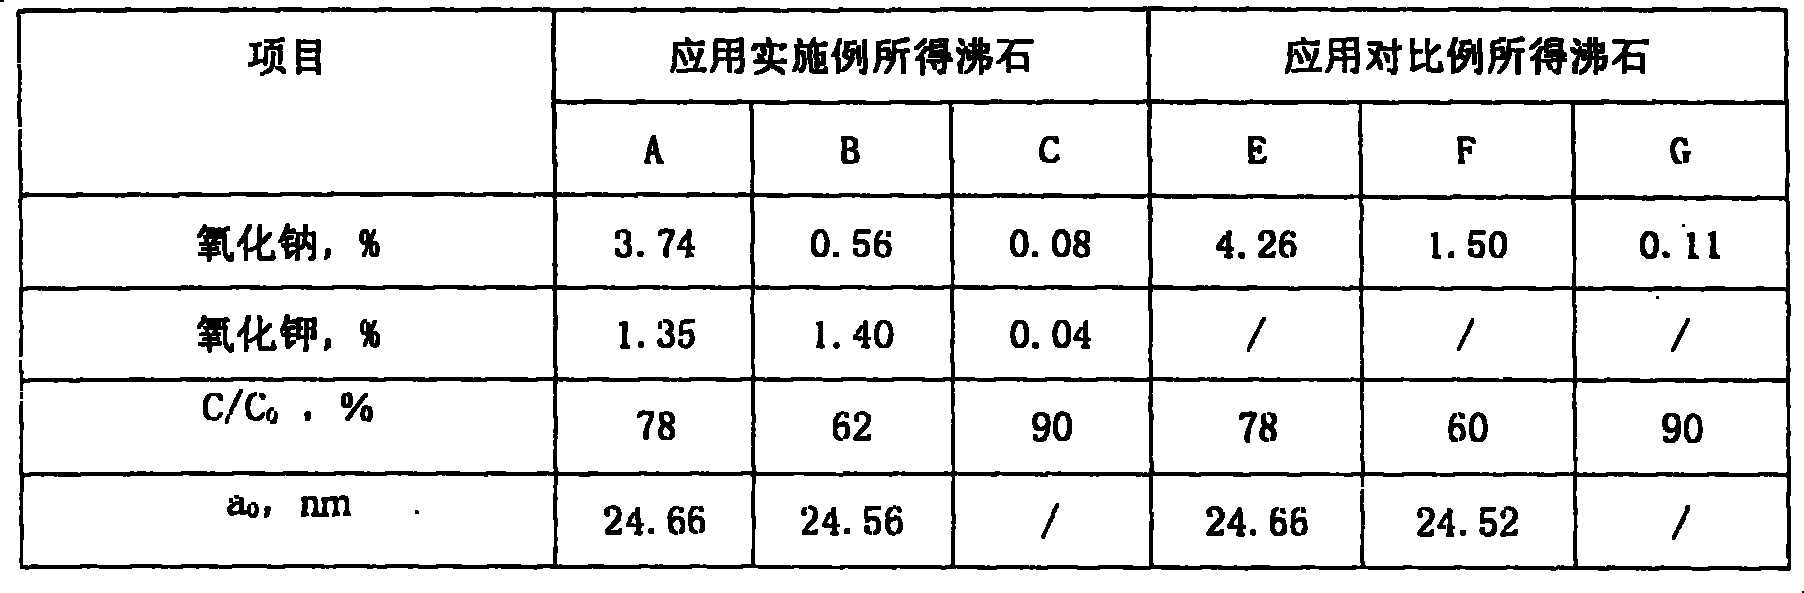 Method of reducing ammonia and nitrogen pollution in process of zeolite modification